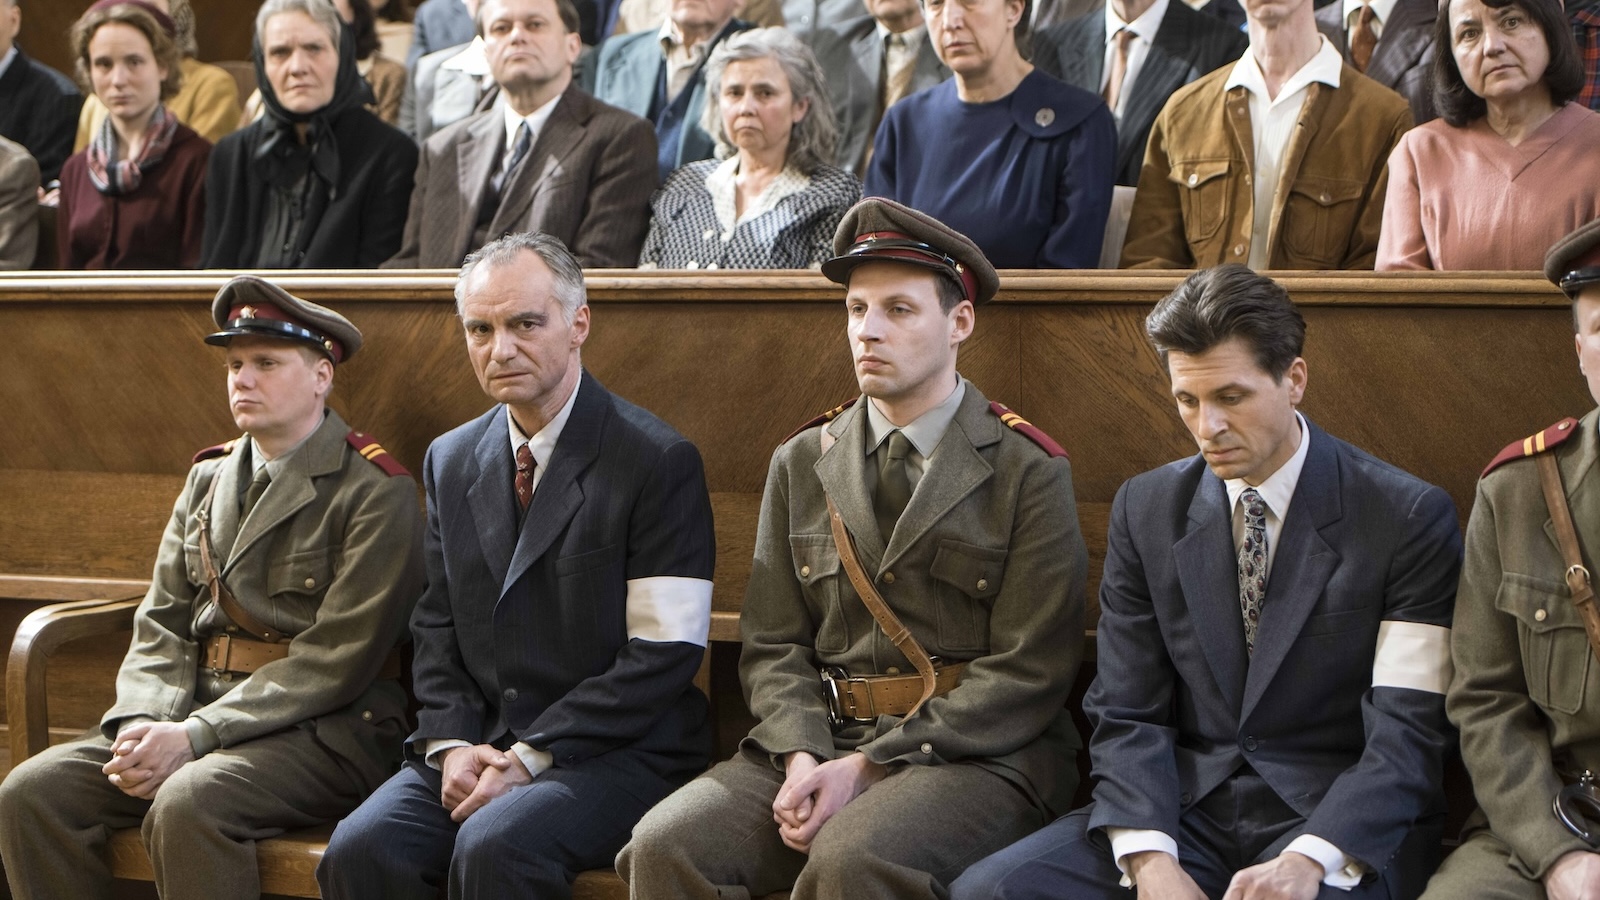 A row of men in a courtroom, who appear to be the defendants on trial, two of them wear blur suits and white armbands, the other two are dressed in military uniforms, all in WWII-era outfits